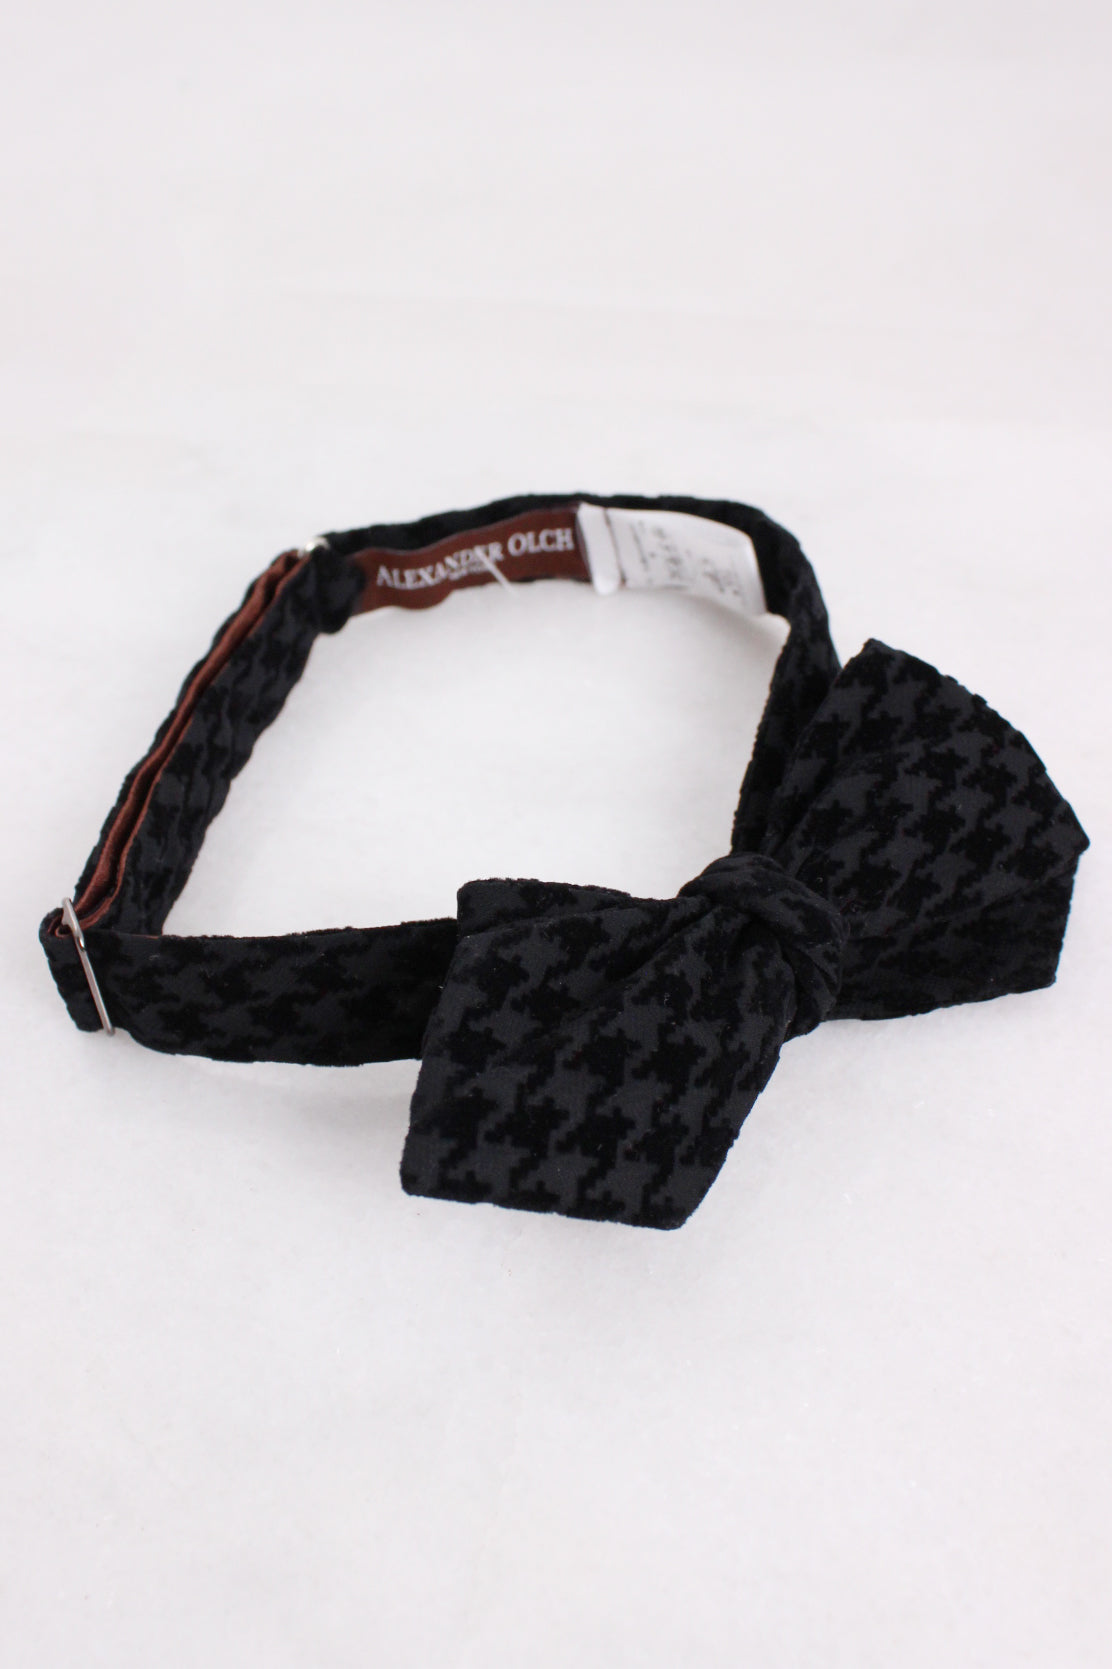 upper angle of bowtie. features adjustable width and branded care tag with text 'alexander olch'. 